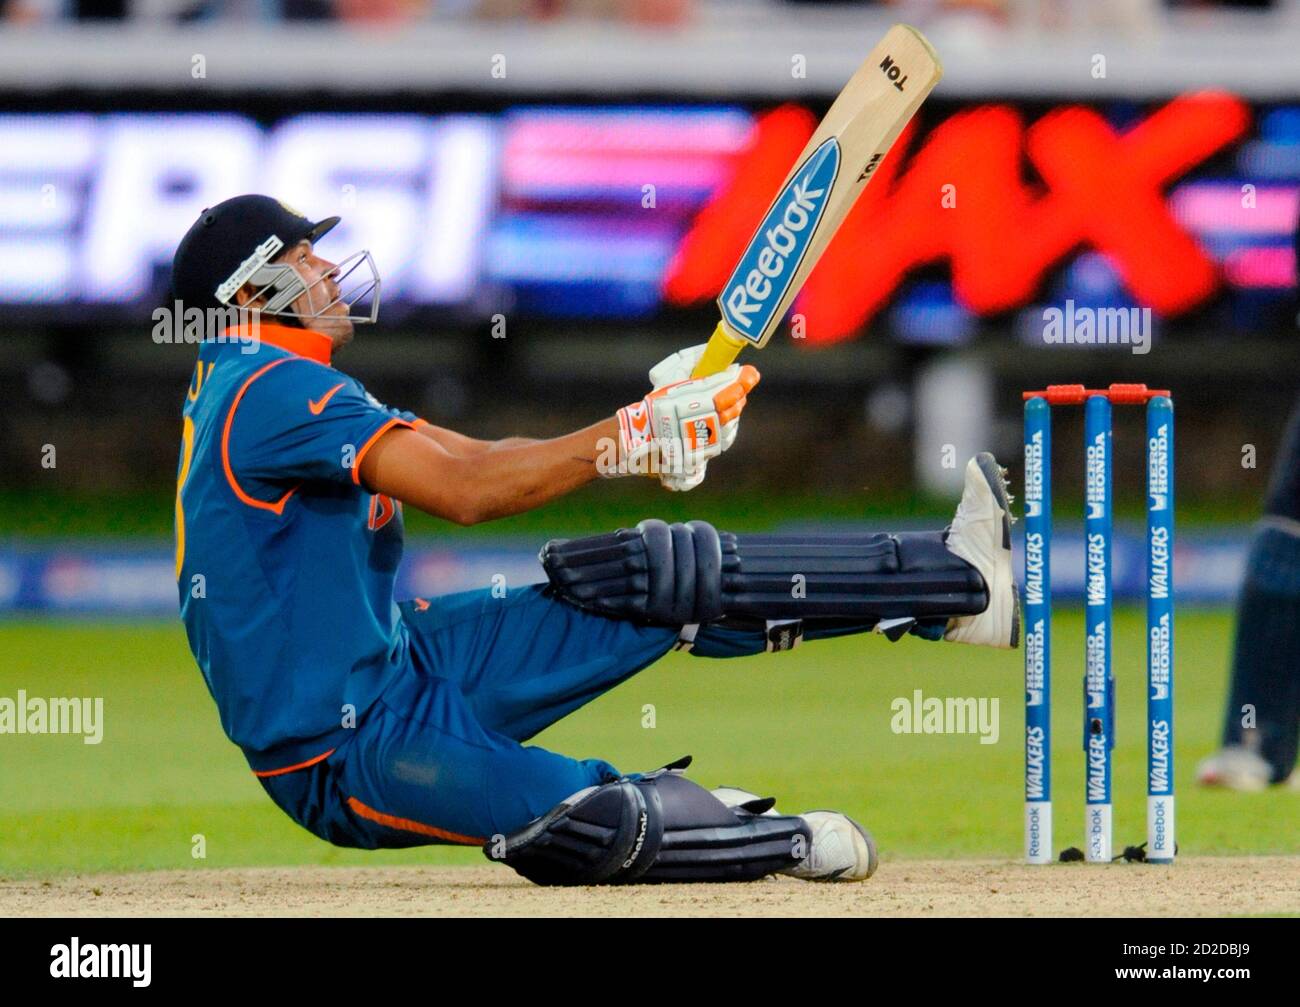 India's Yusuf Pathan falls to the after he hit shot against England in the ICC World Twenty20 cricket super eight match at Lord's cricket ground in London June 14, 2009.